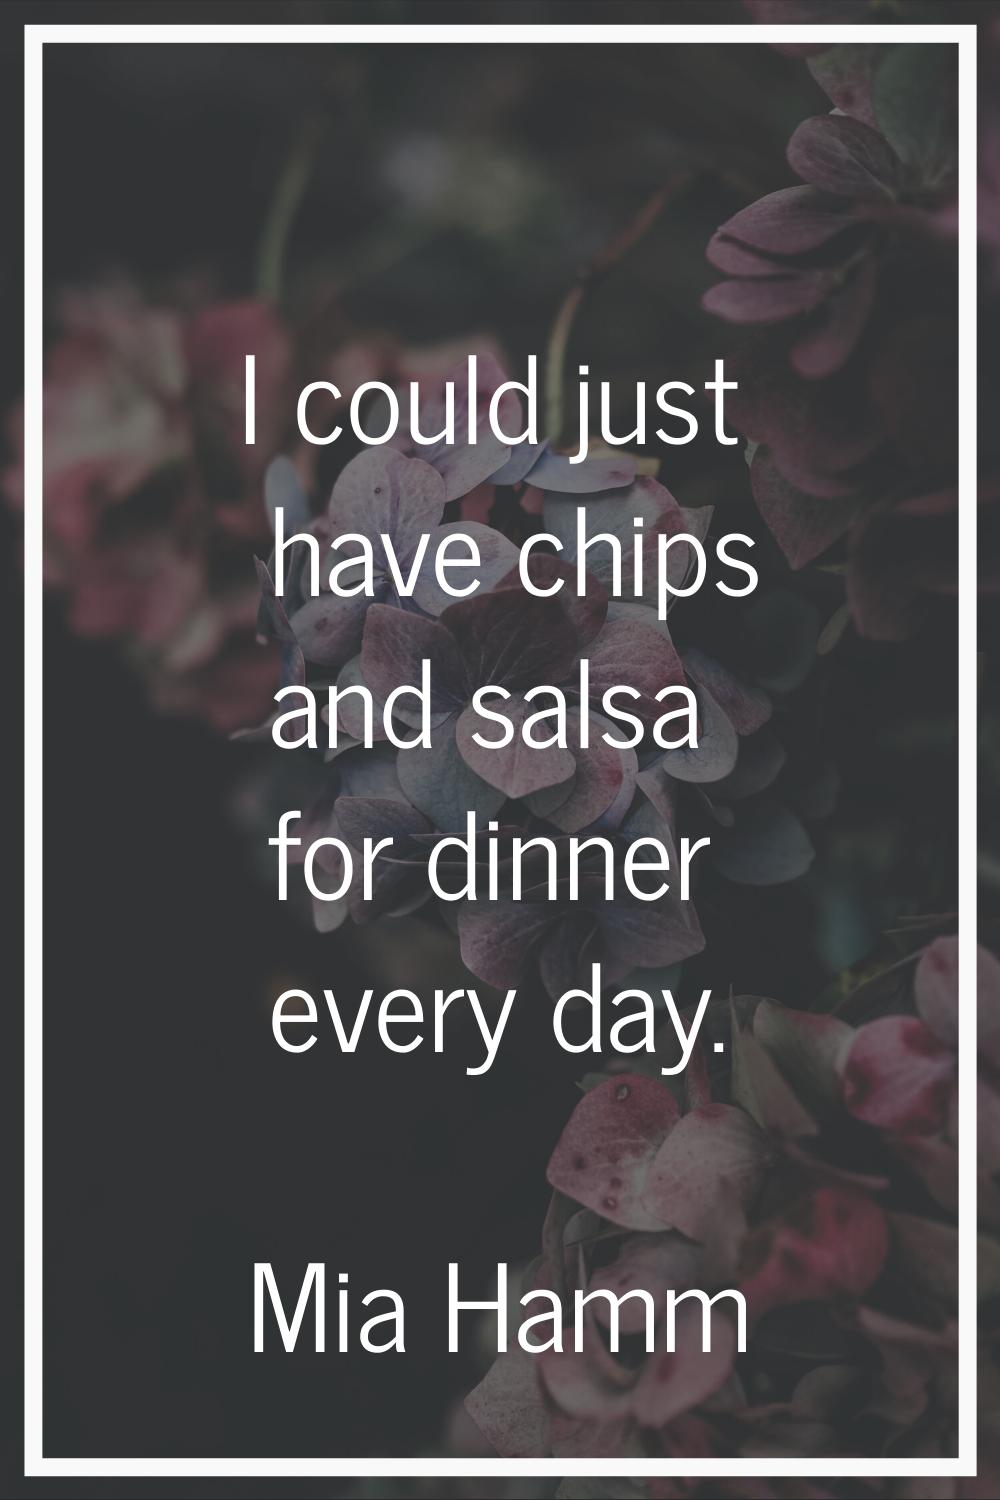 I could just have chips and salsa for dinner every day.